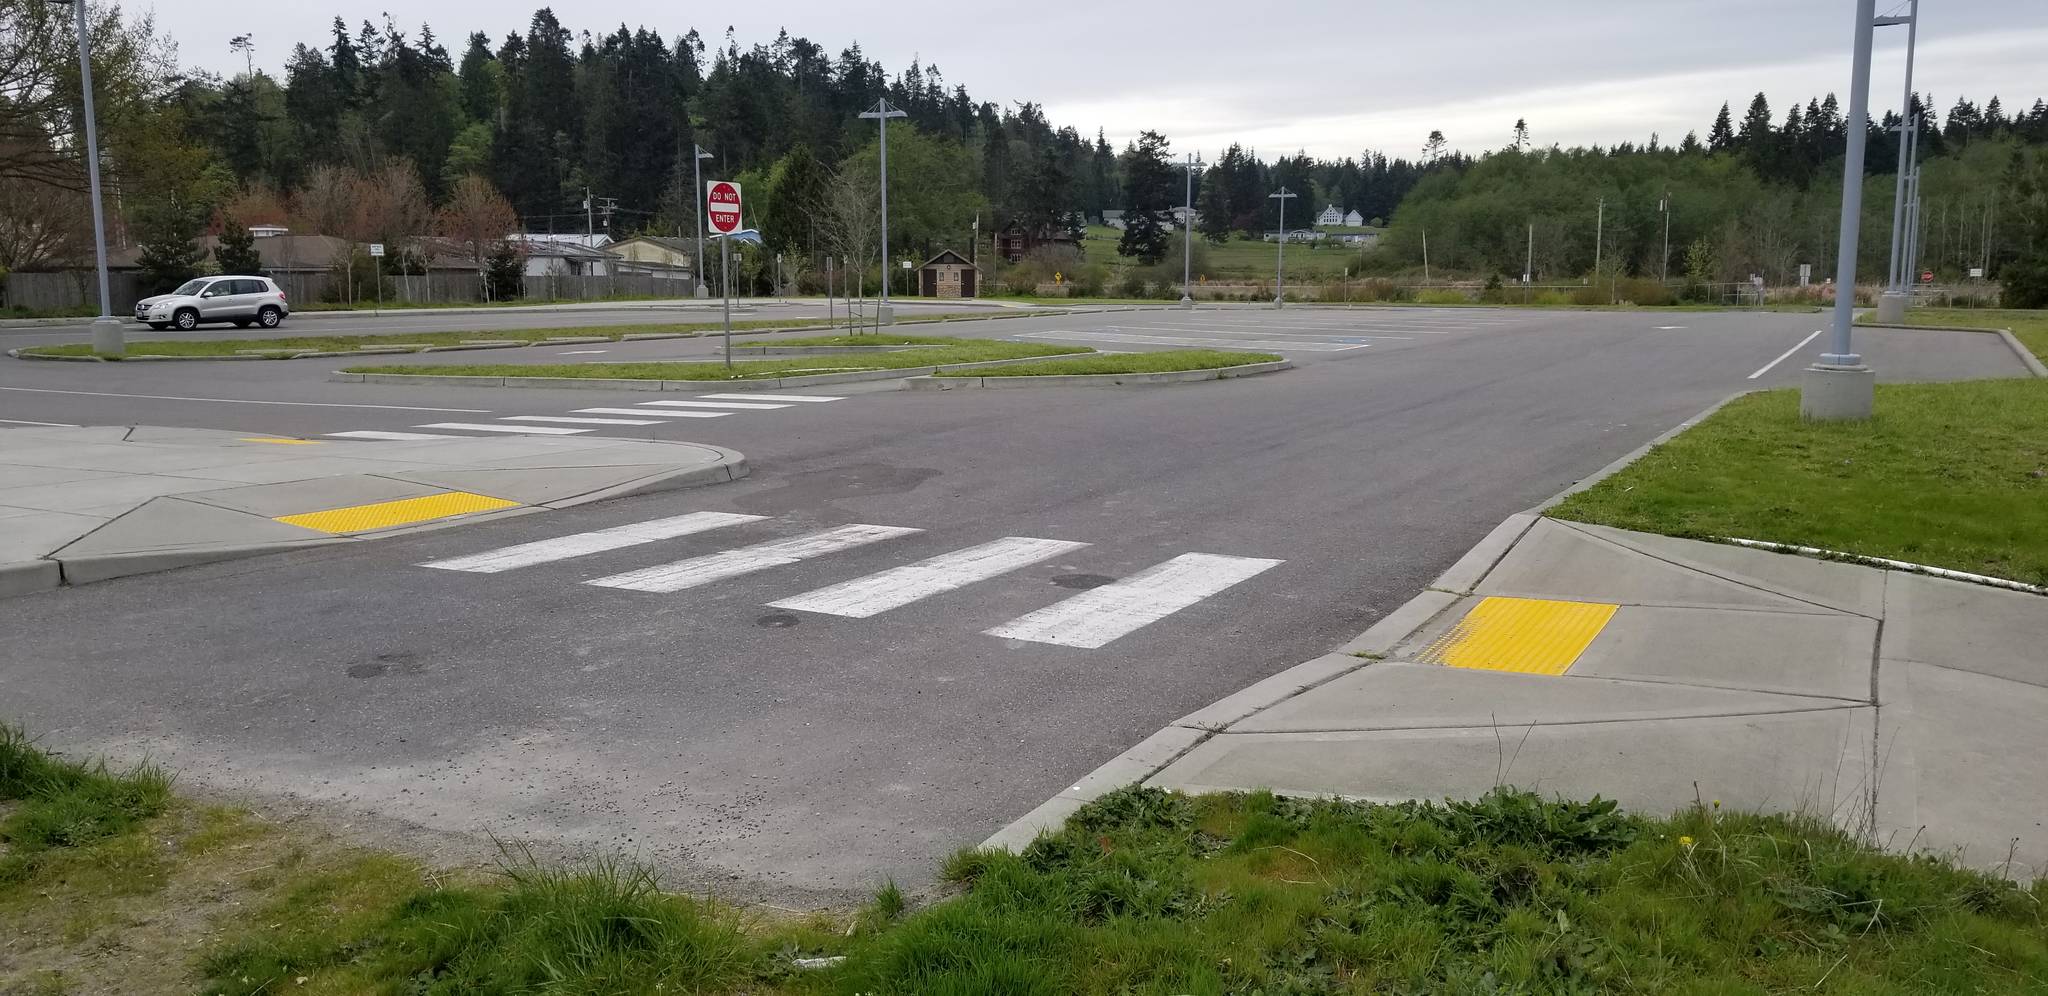 While the Point No Point boat launch itself has not yet been built, the parking lot has already been constructed and a total of about $2.9 million has been spent on the project. Nick Twietmeyer / Kitsap New Group.